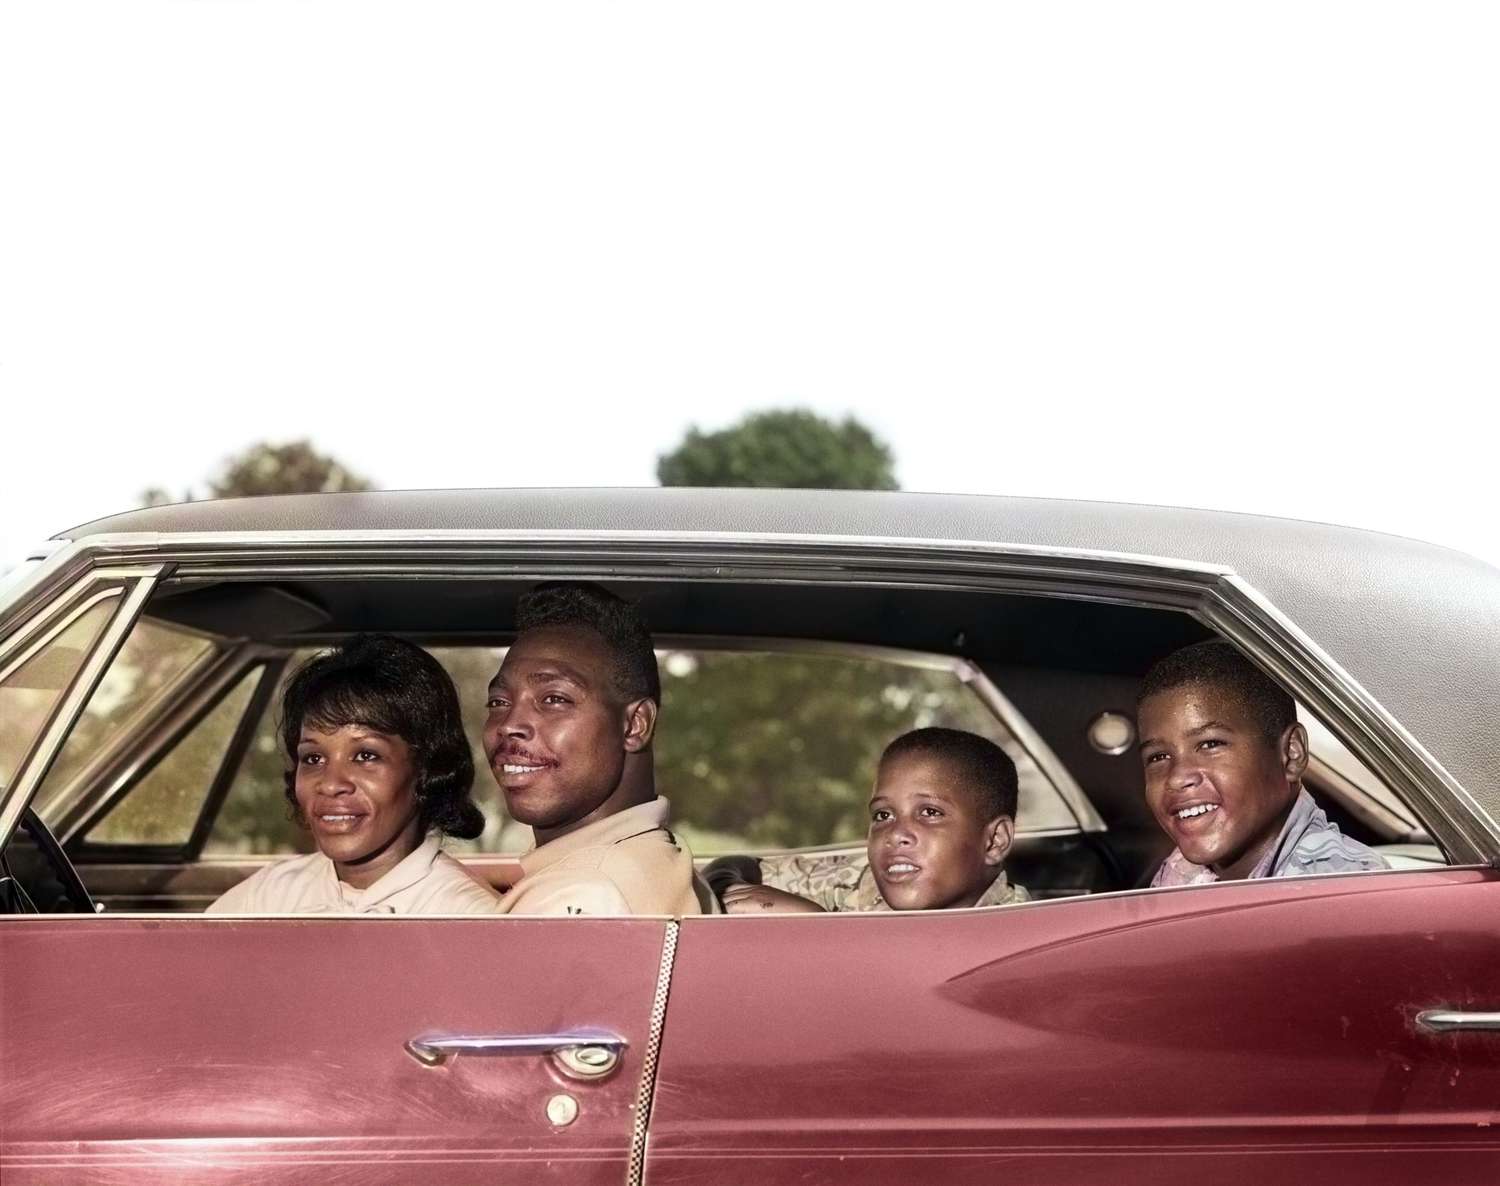 1960s SIDE VIEW OUTDOOR SMILING AFRICAN AMERICAN FAMILY FATHER MOTHER TWO SONS SITTING IN FOUR DOOR SEDAN AUTOMOBILE